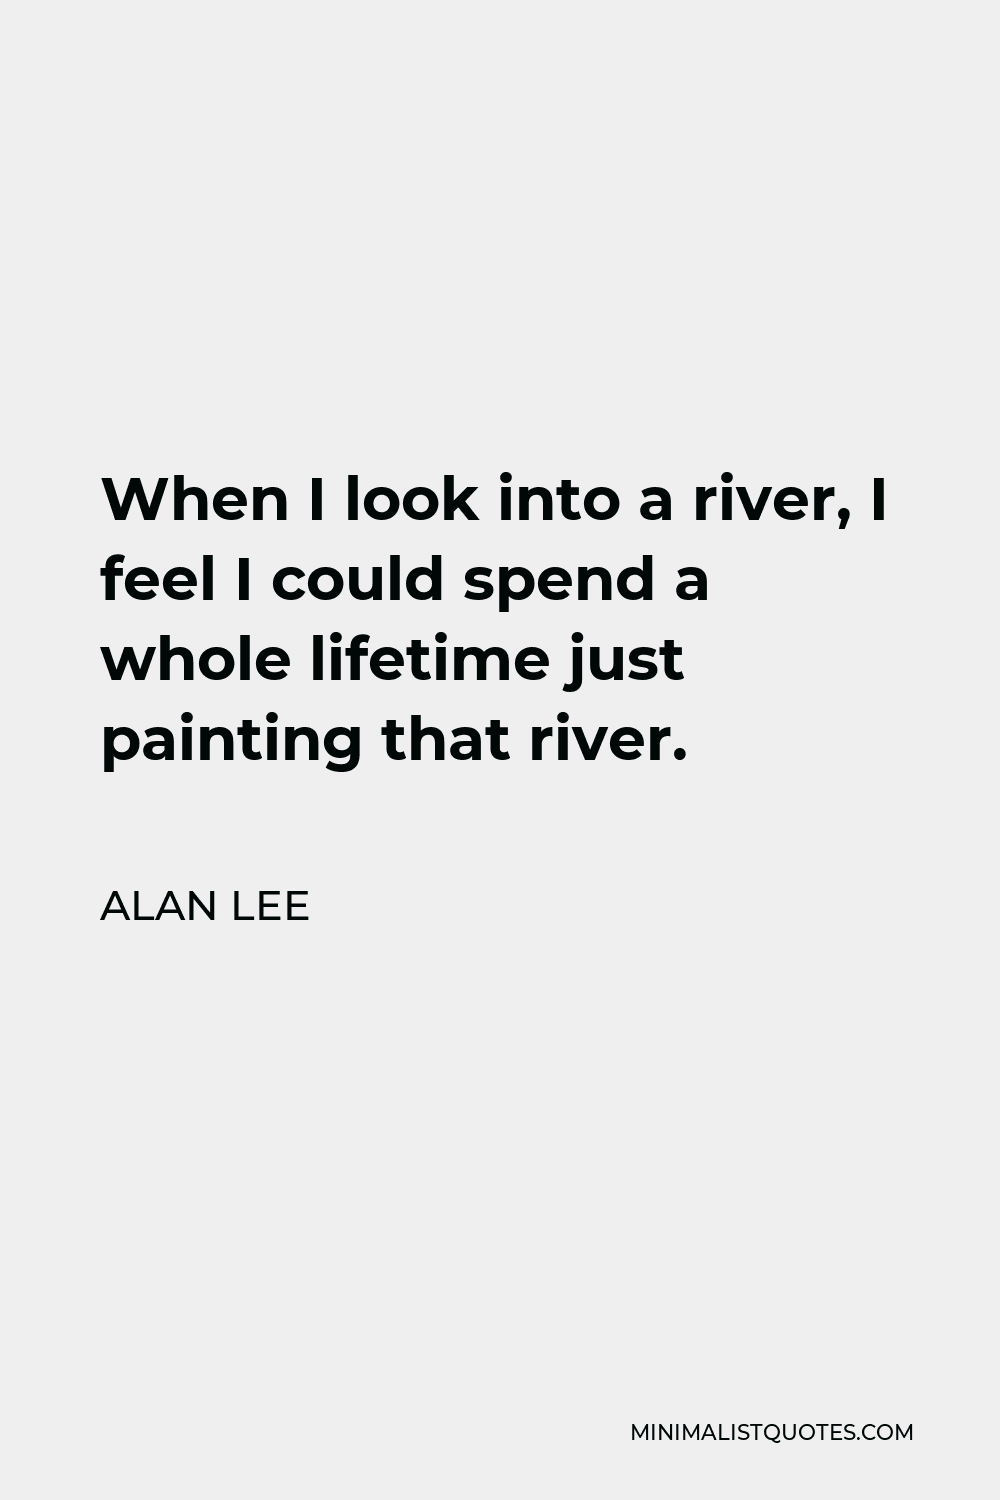 Alan Lee Quote - When I look into a river, I feel I could spend a whole lifetime just painting that river.